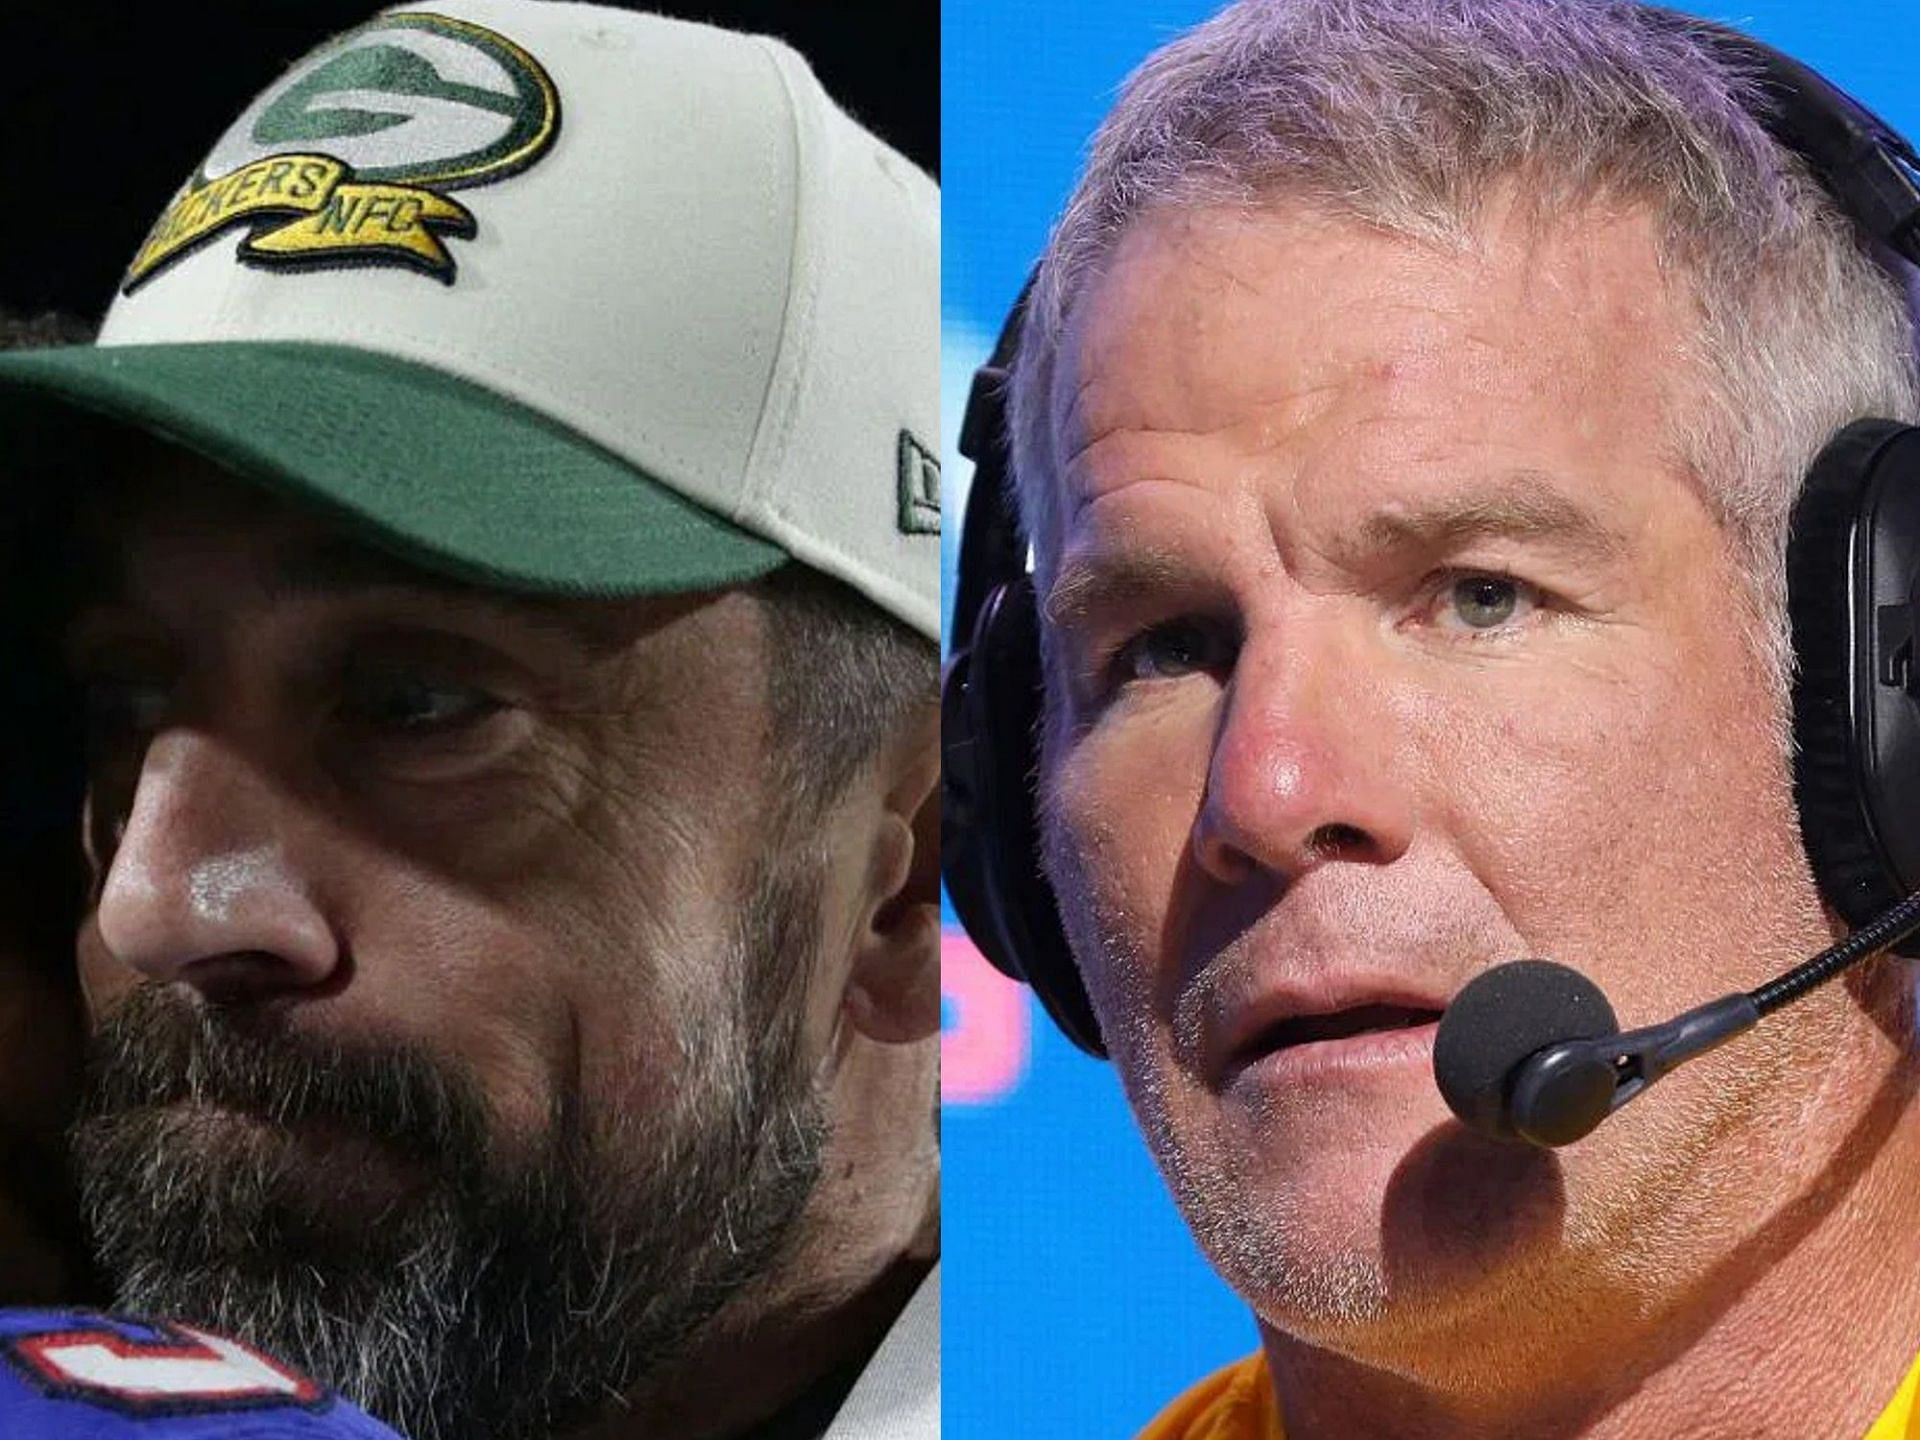 Brett Favre and Aaron Rodgers in the modern era